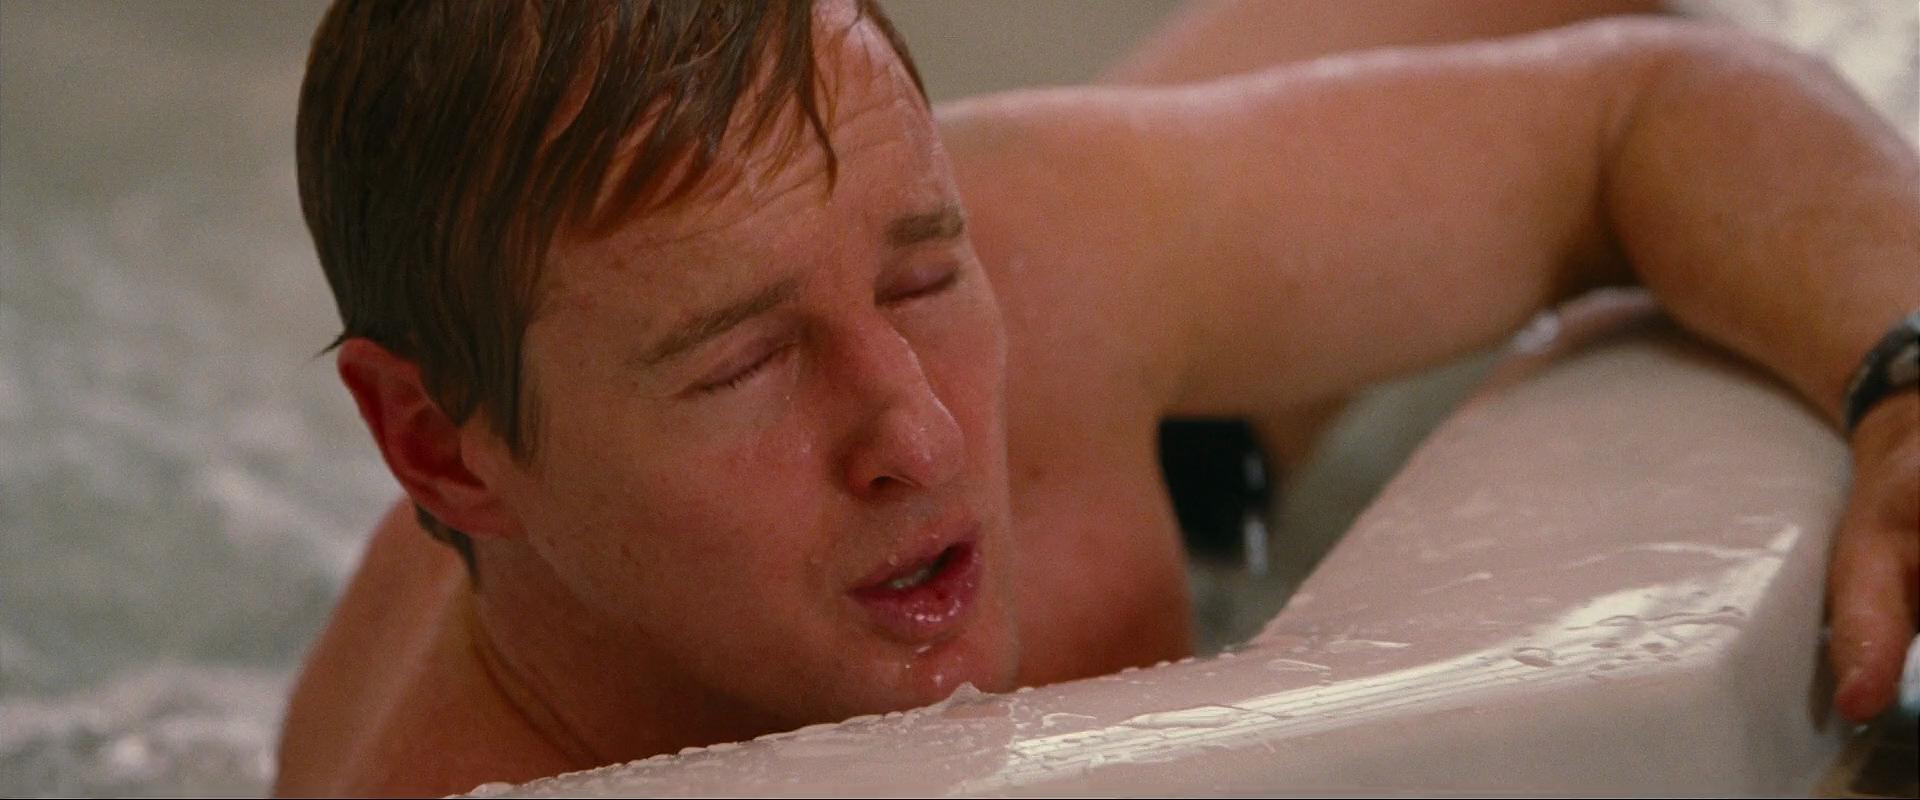 Hall Pass Hot Tub Scene - Pasport Images, Pictures, Photos, 